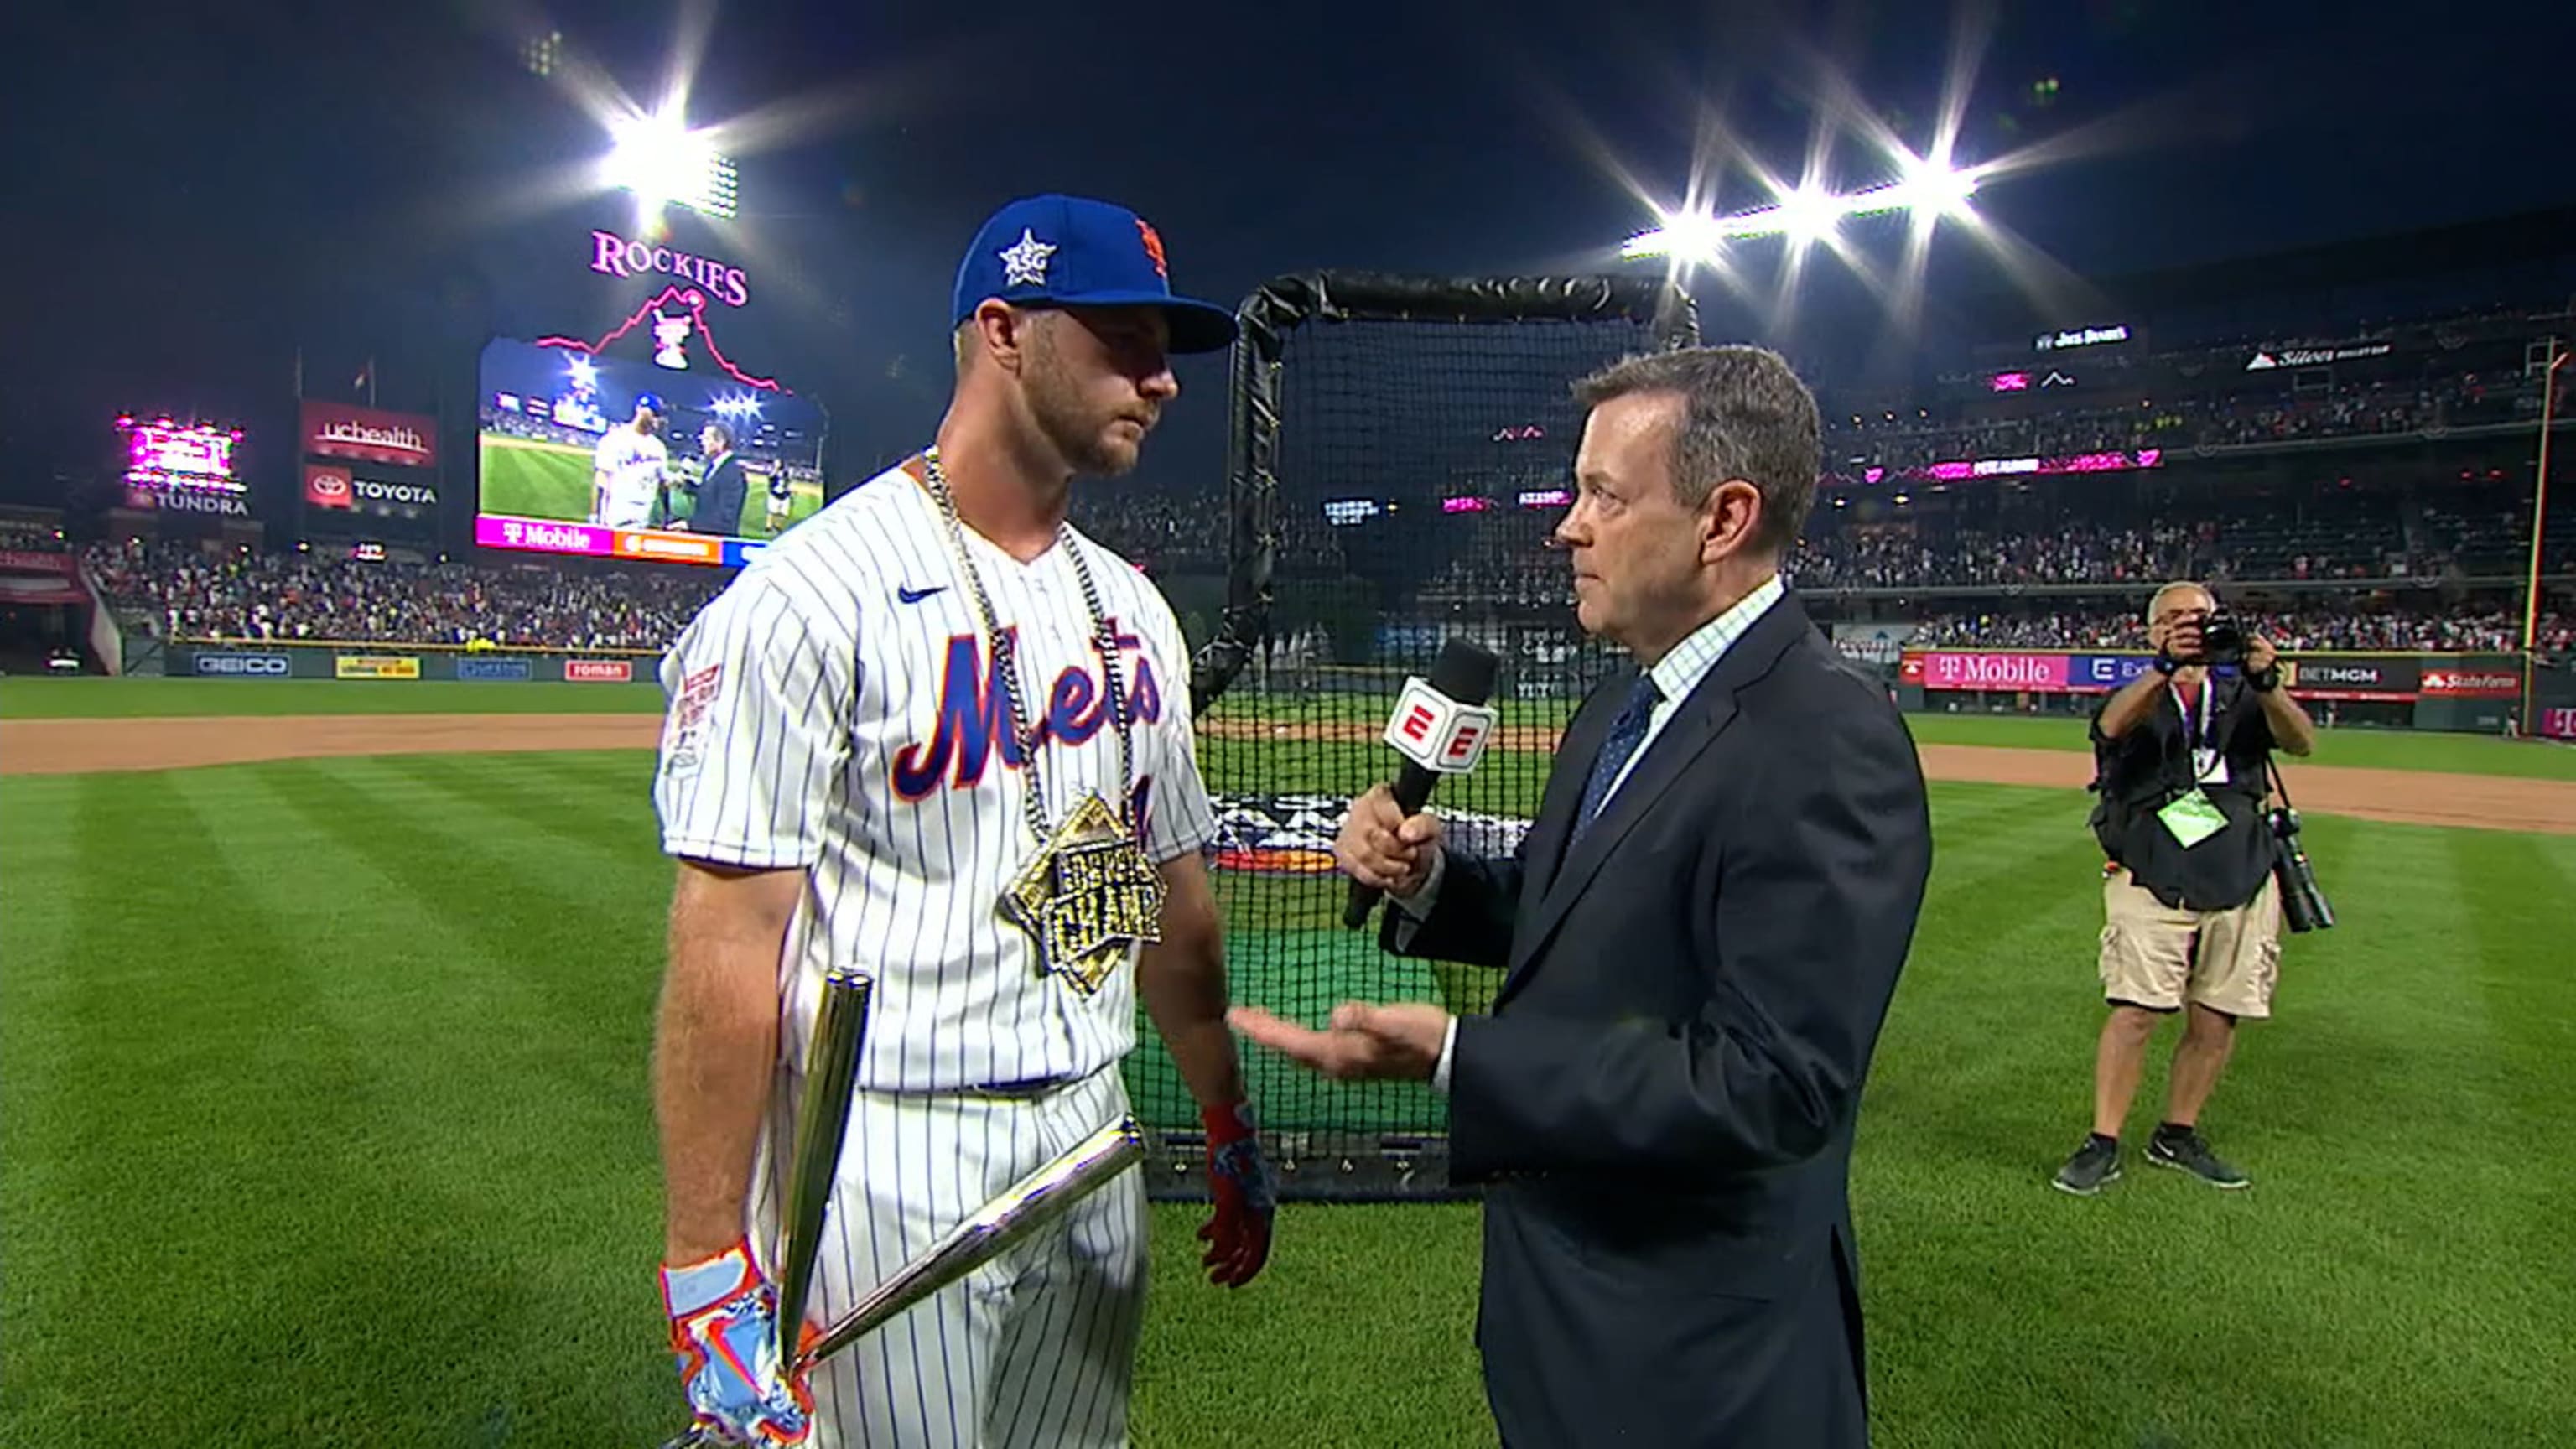 2021 Home Run Derby: Pete Alonso returns to defend his title